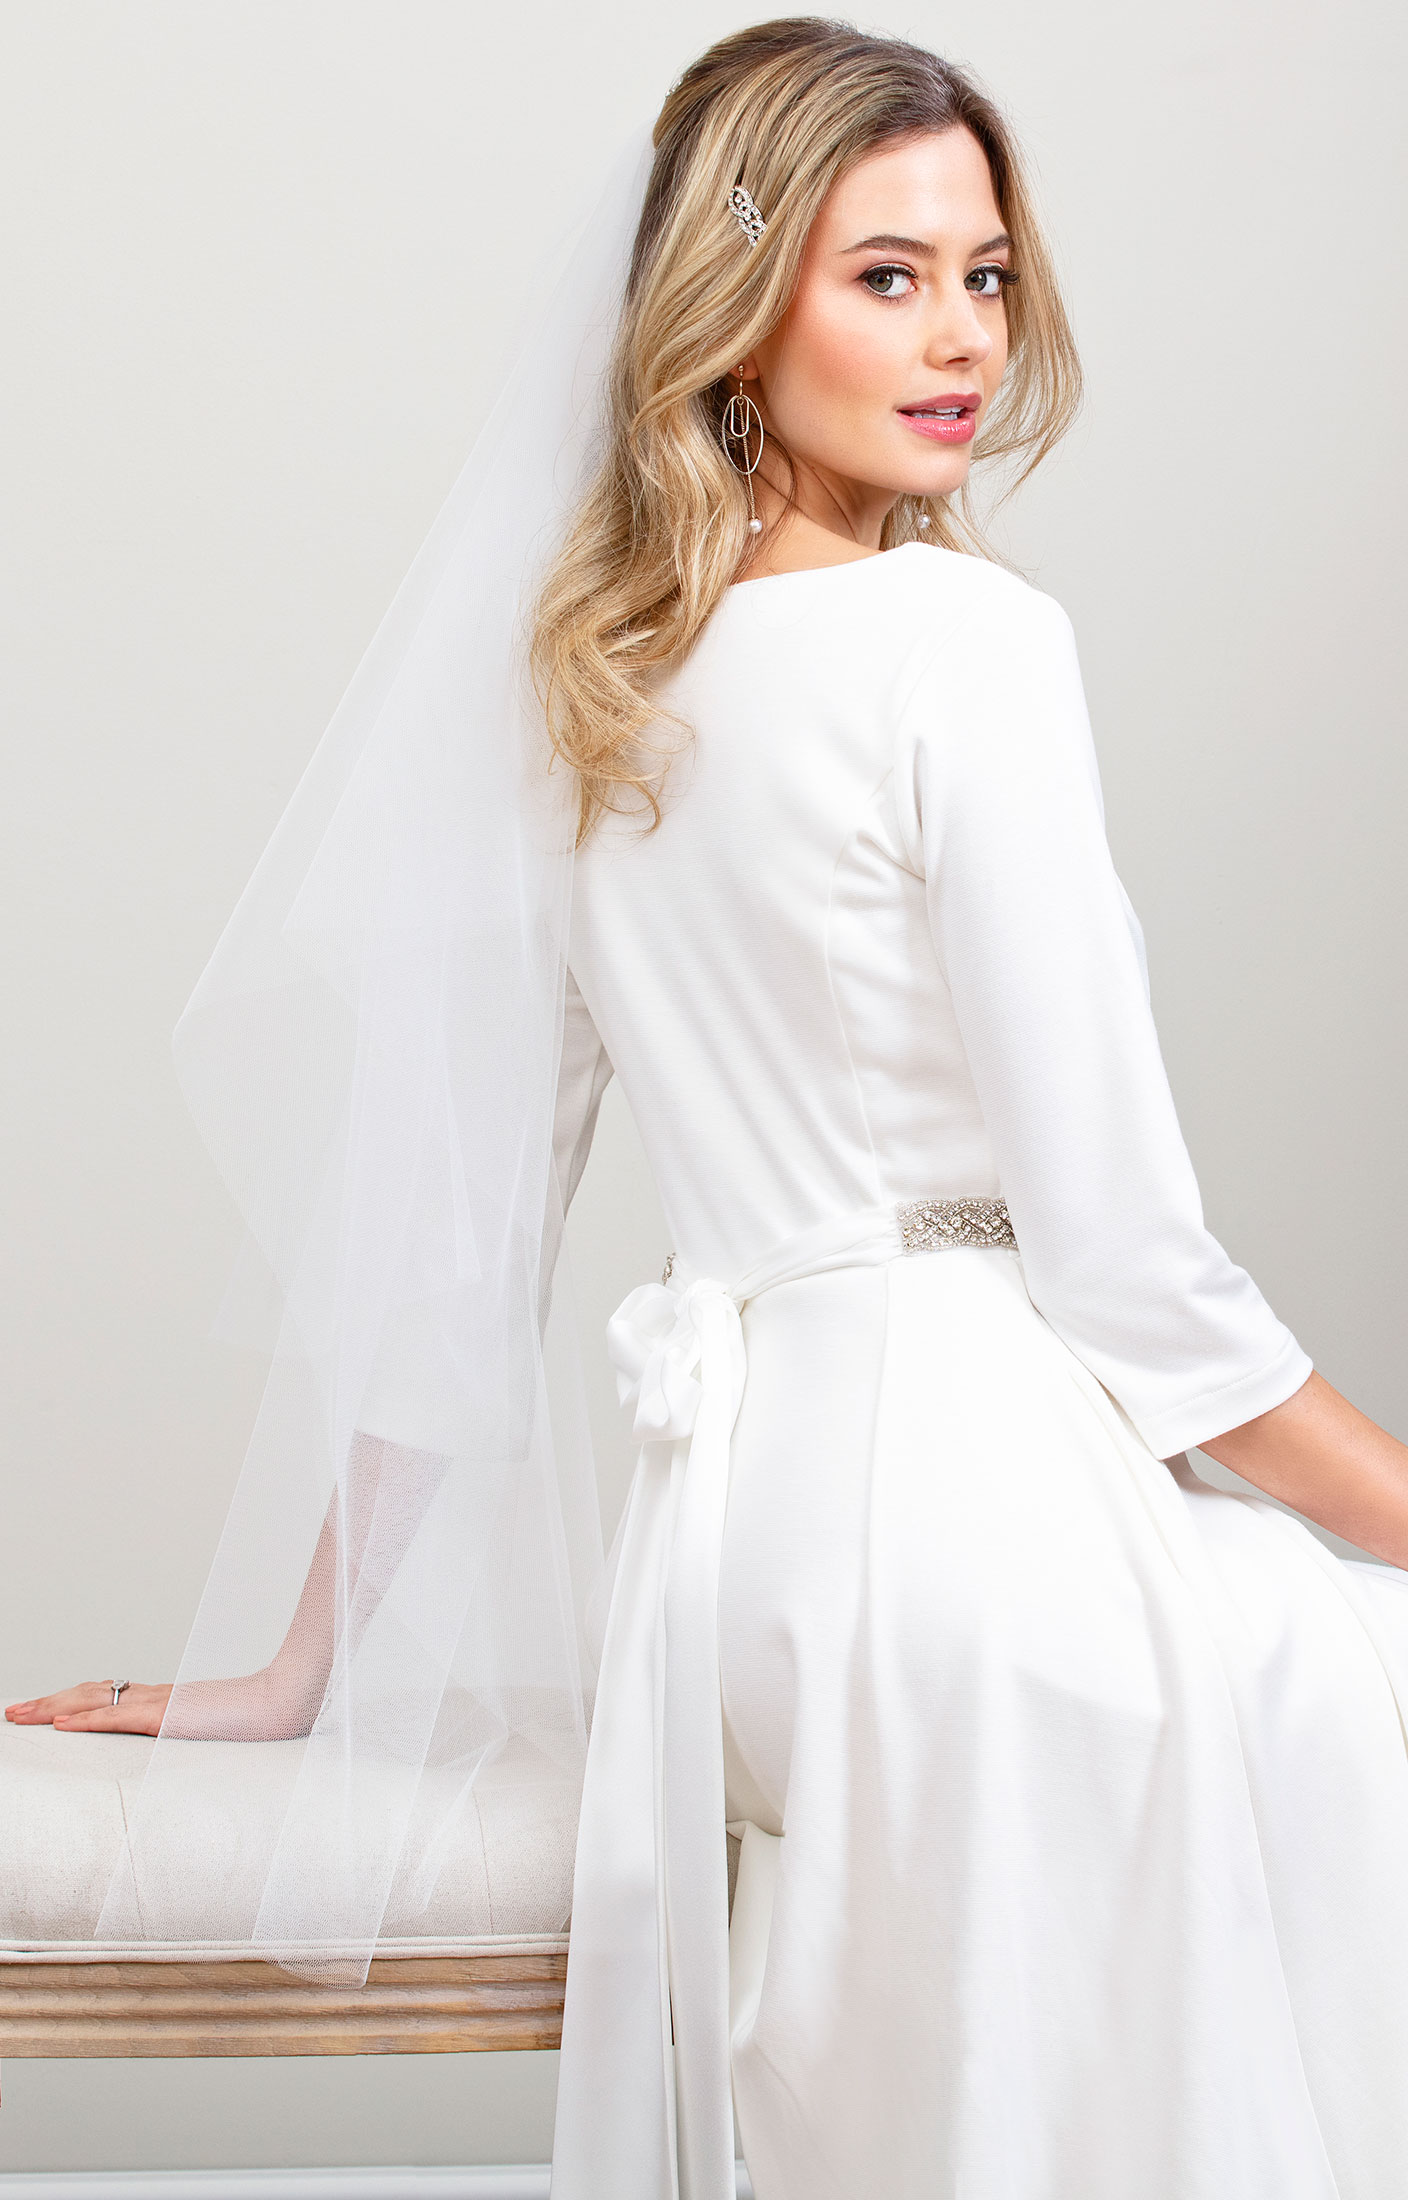 five-great-veils-for-short-wedding-dresses at Cutting Edge